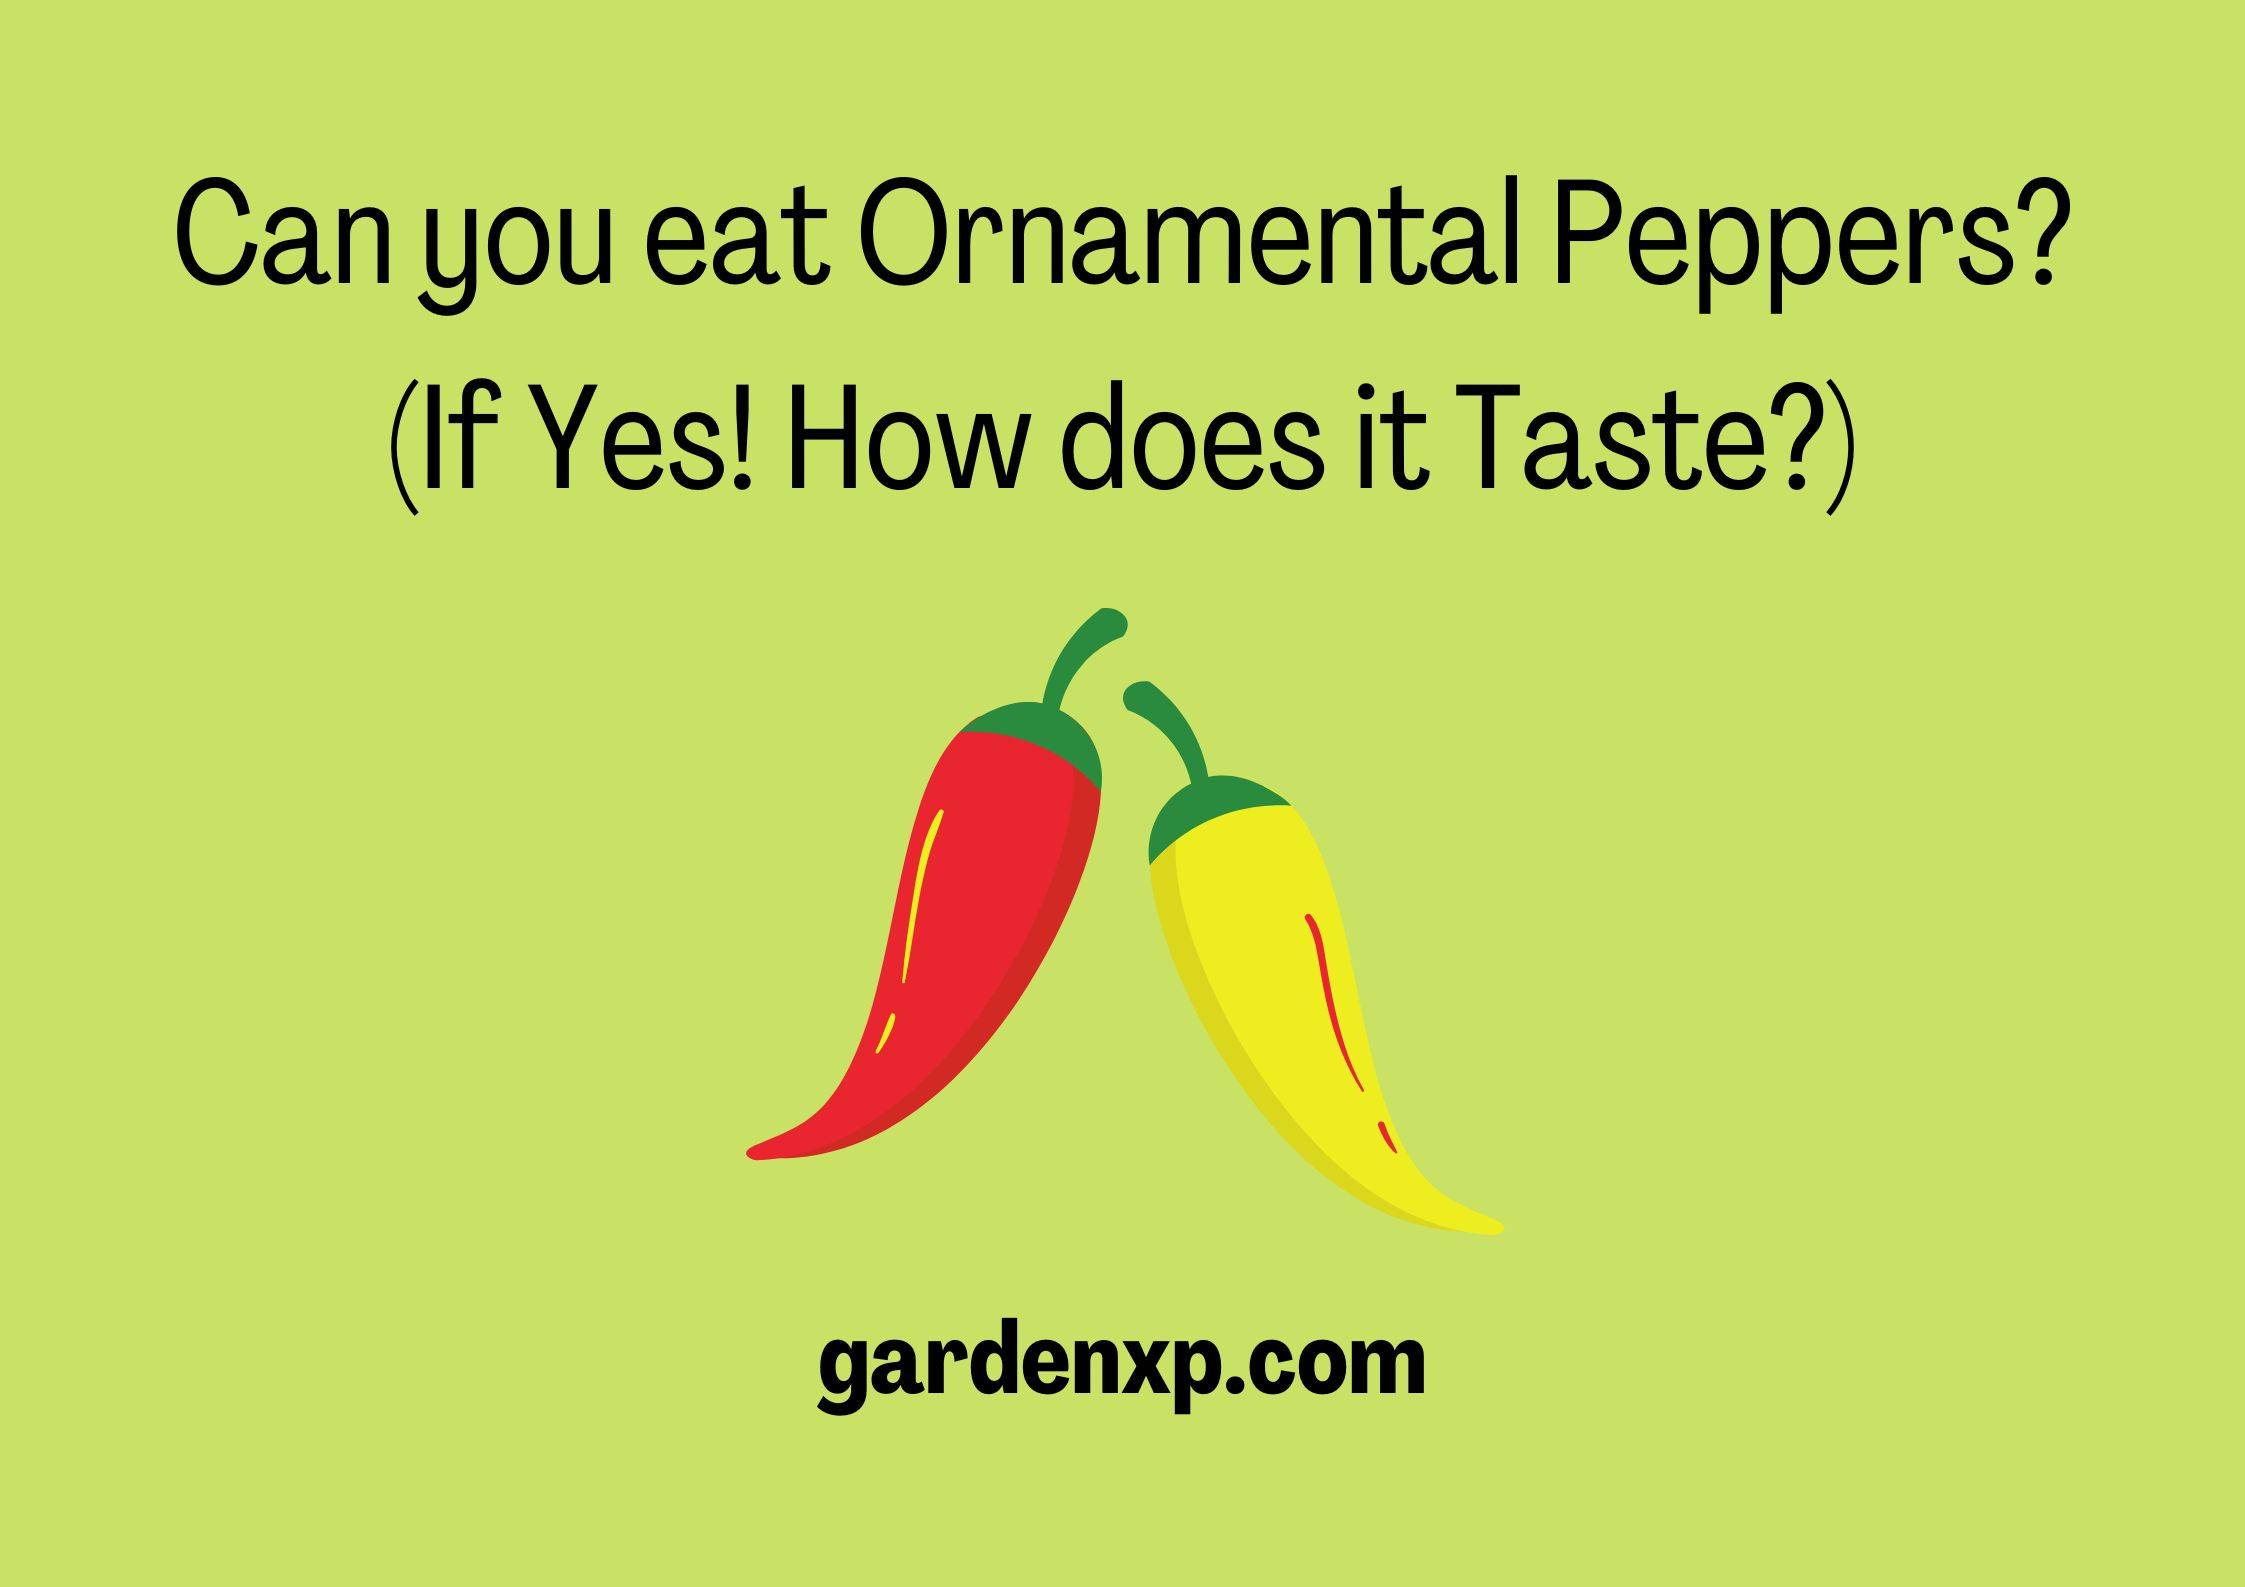 Can you eat Ornamental Peppers? (If Yes! How does it Taste?)